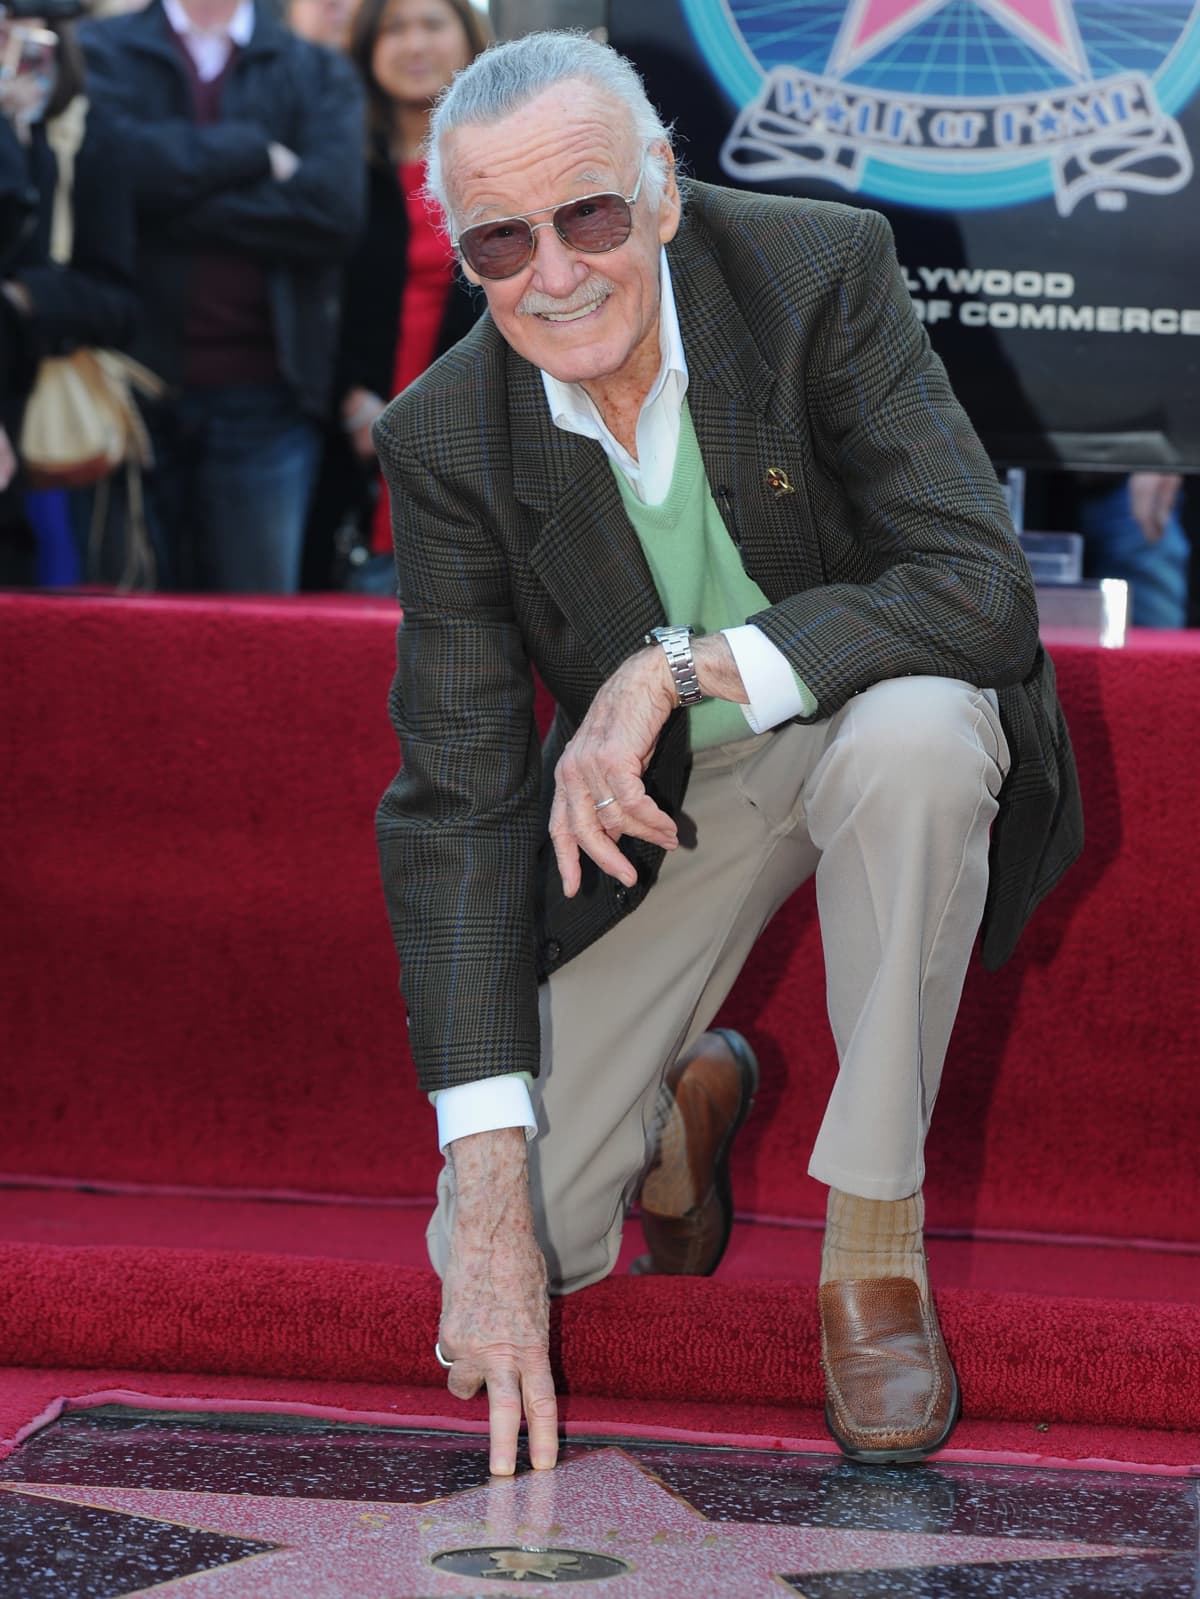 HOLLYWOOD, CA - JUNE 28:  Stan Lee attends the premiere of Columbia Pictures' "Spider-Man: Homecoming" at TCL Chinese Theatre on June 28, 2017 in Hollywood, California.  (Photo by Alberto E. Rodriguez/Getty Images)